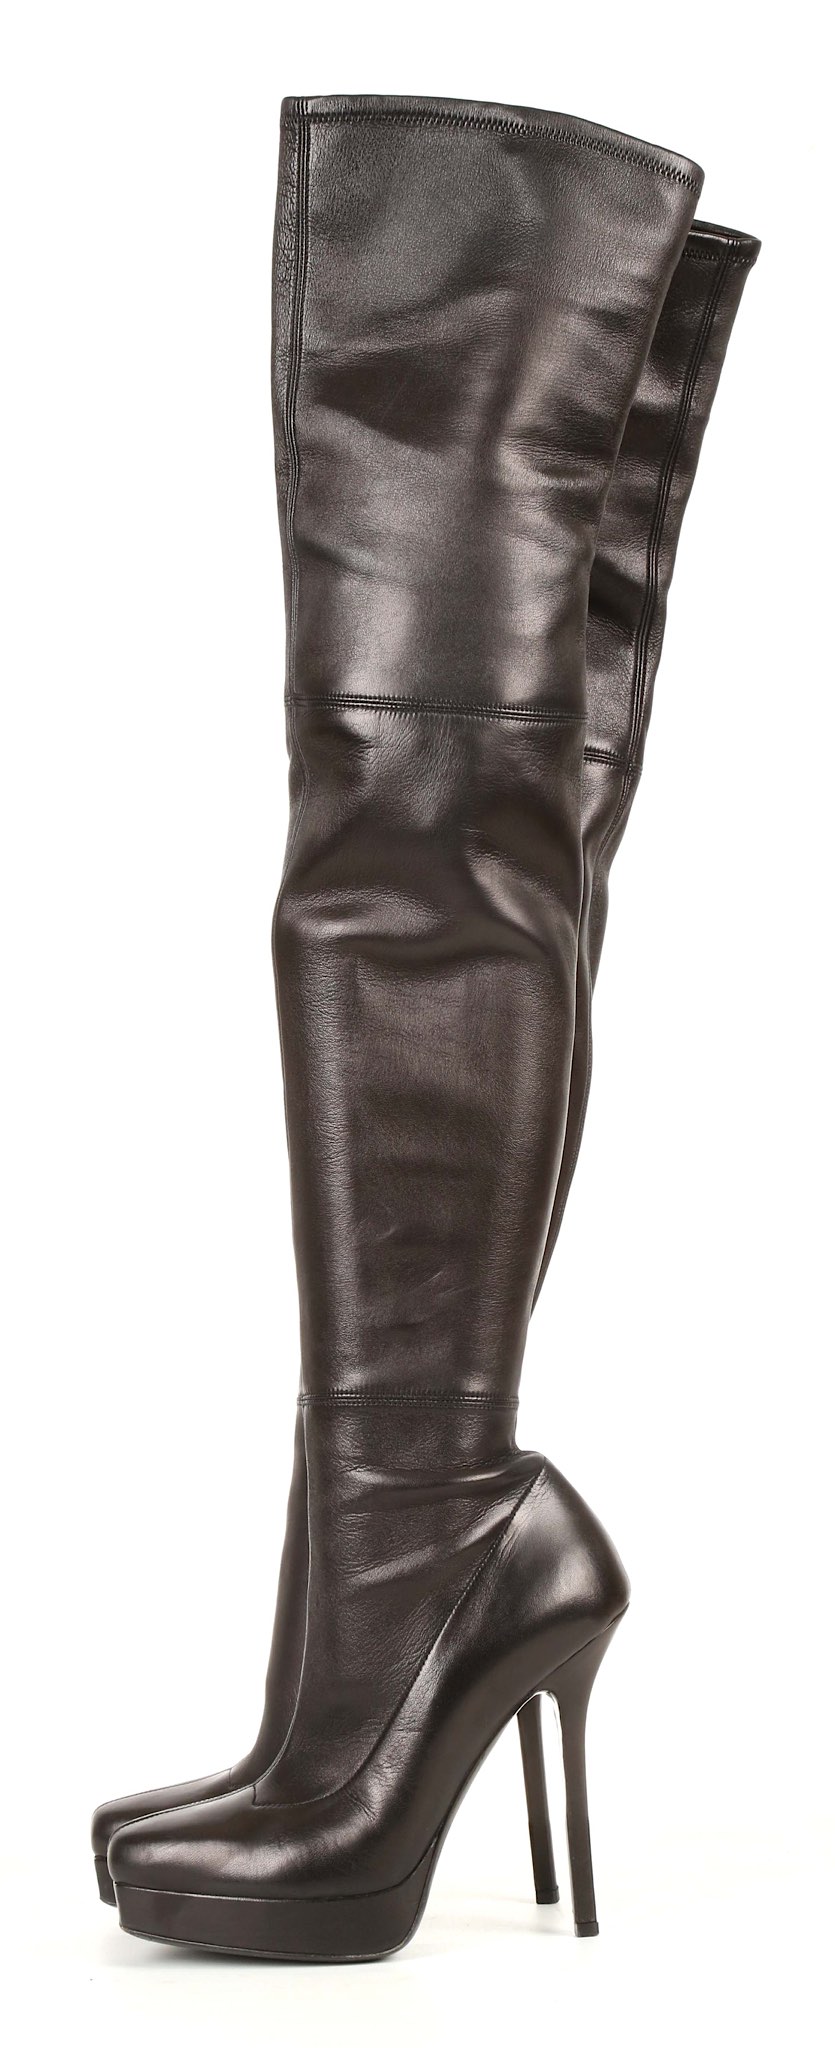 GUCCI THIGH HIGH BLACK LEATHER BOOTS, stiletto heel, size 38, and a pair of brown Casadei boots - Image 5 of 8